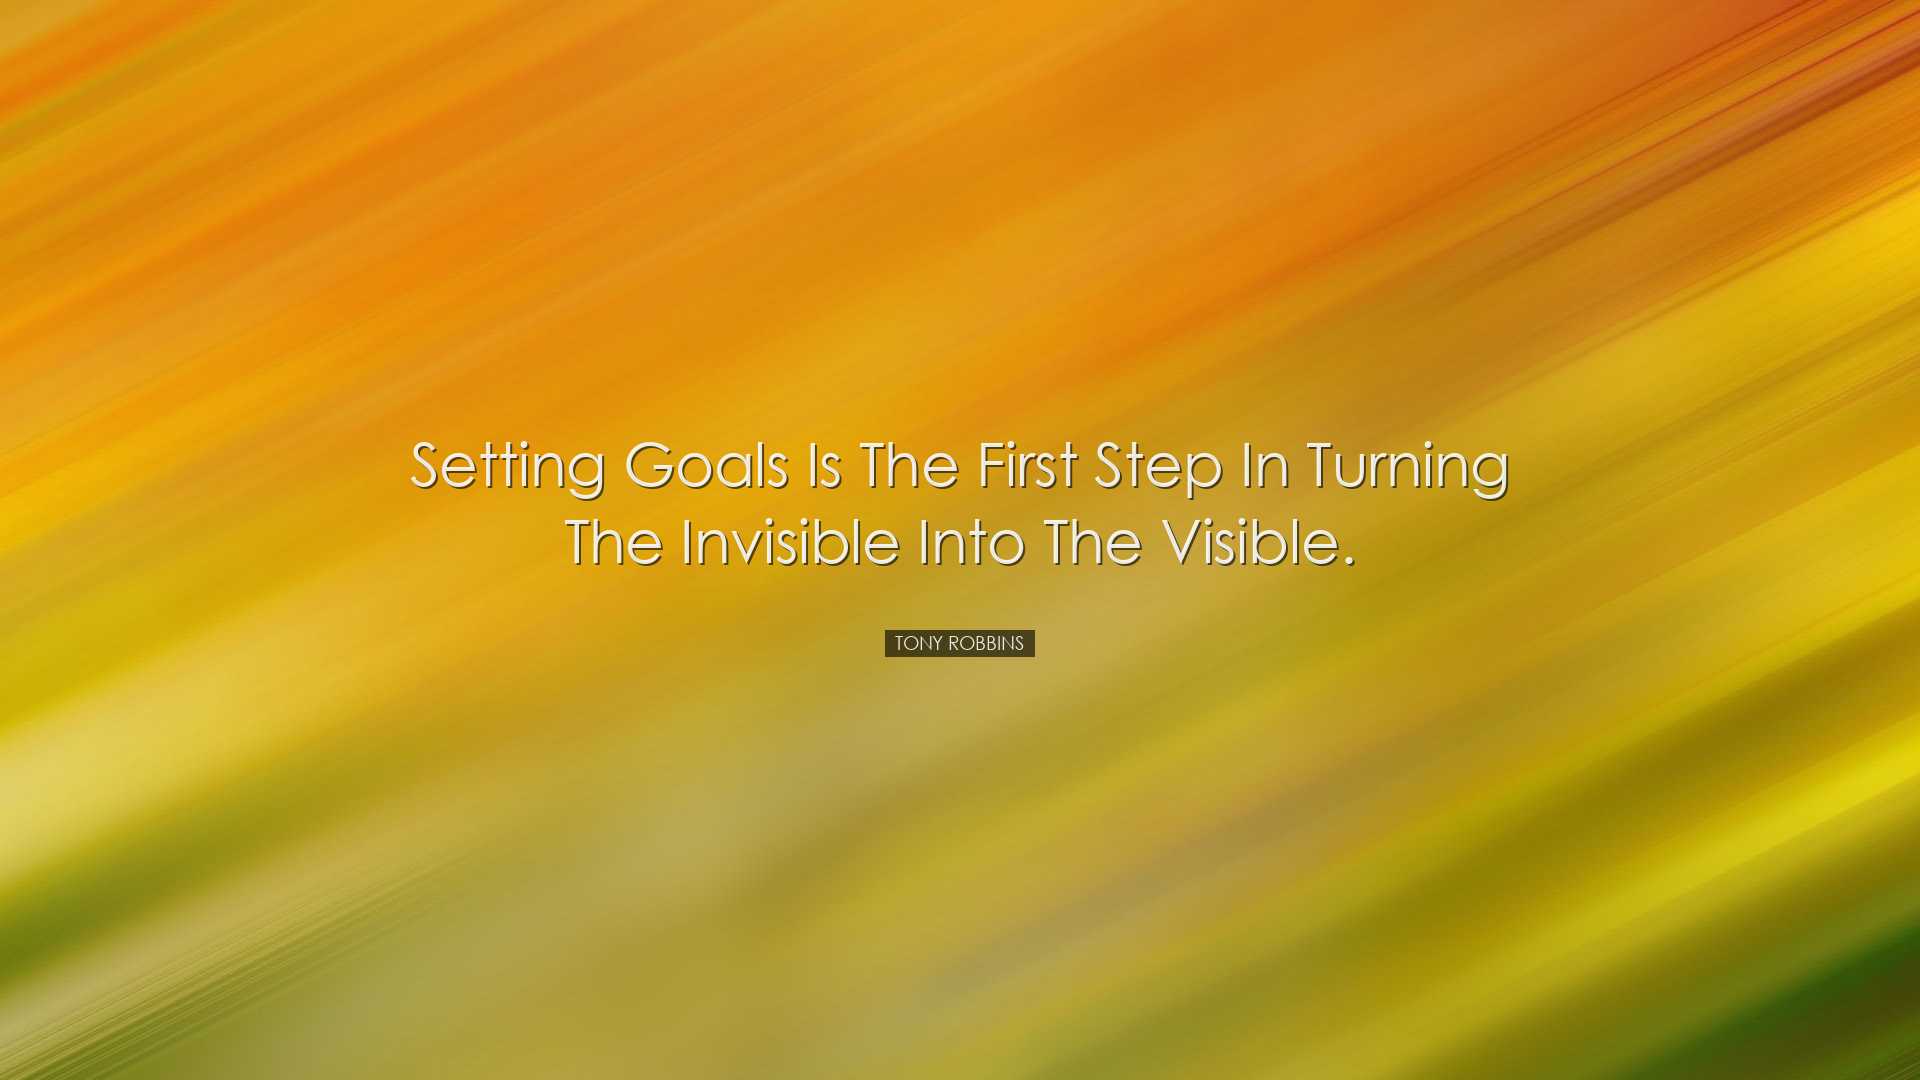 Setting goals is the first step in turning the invisible into the